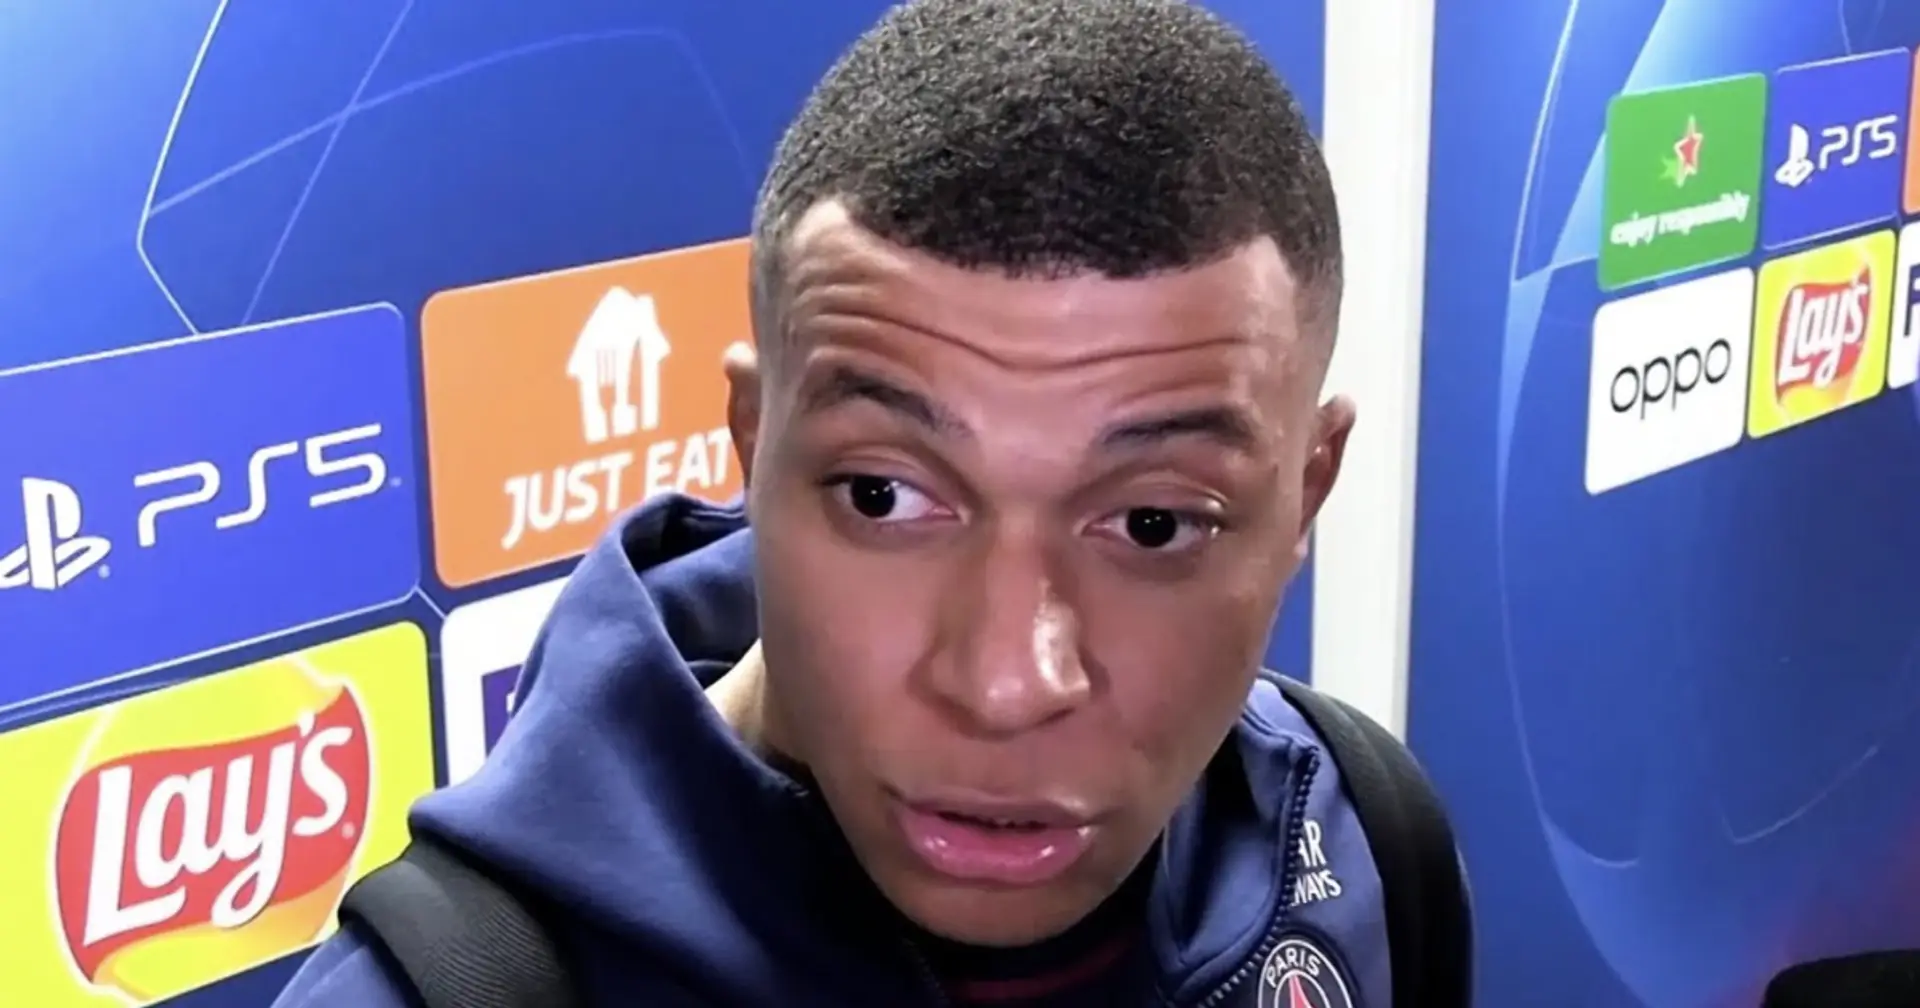 Mbappe set to make public statement, content revealed (reliability: 3 stars)